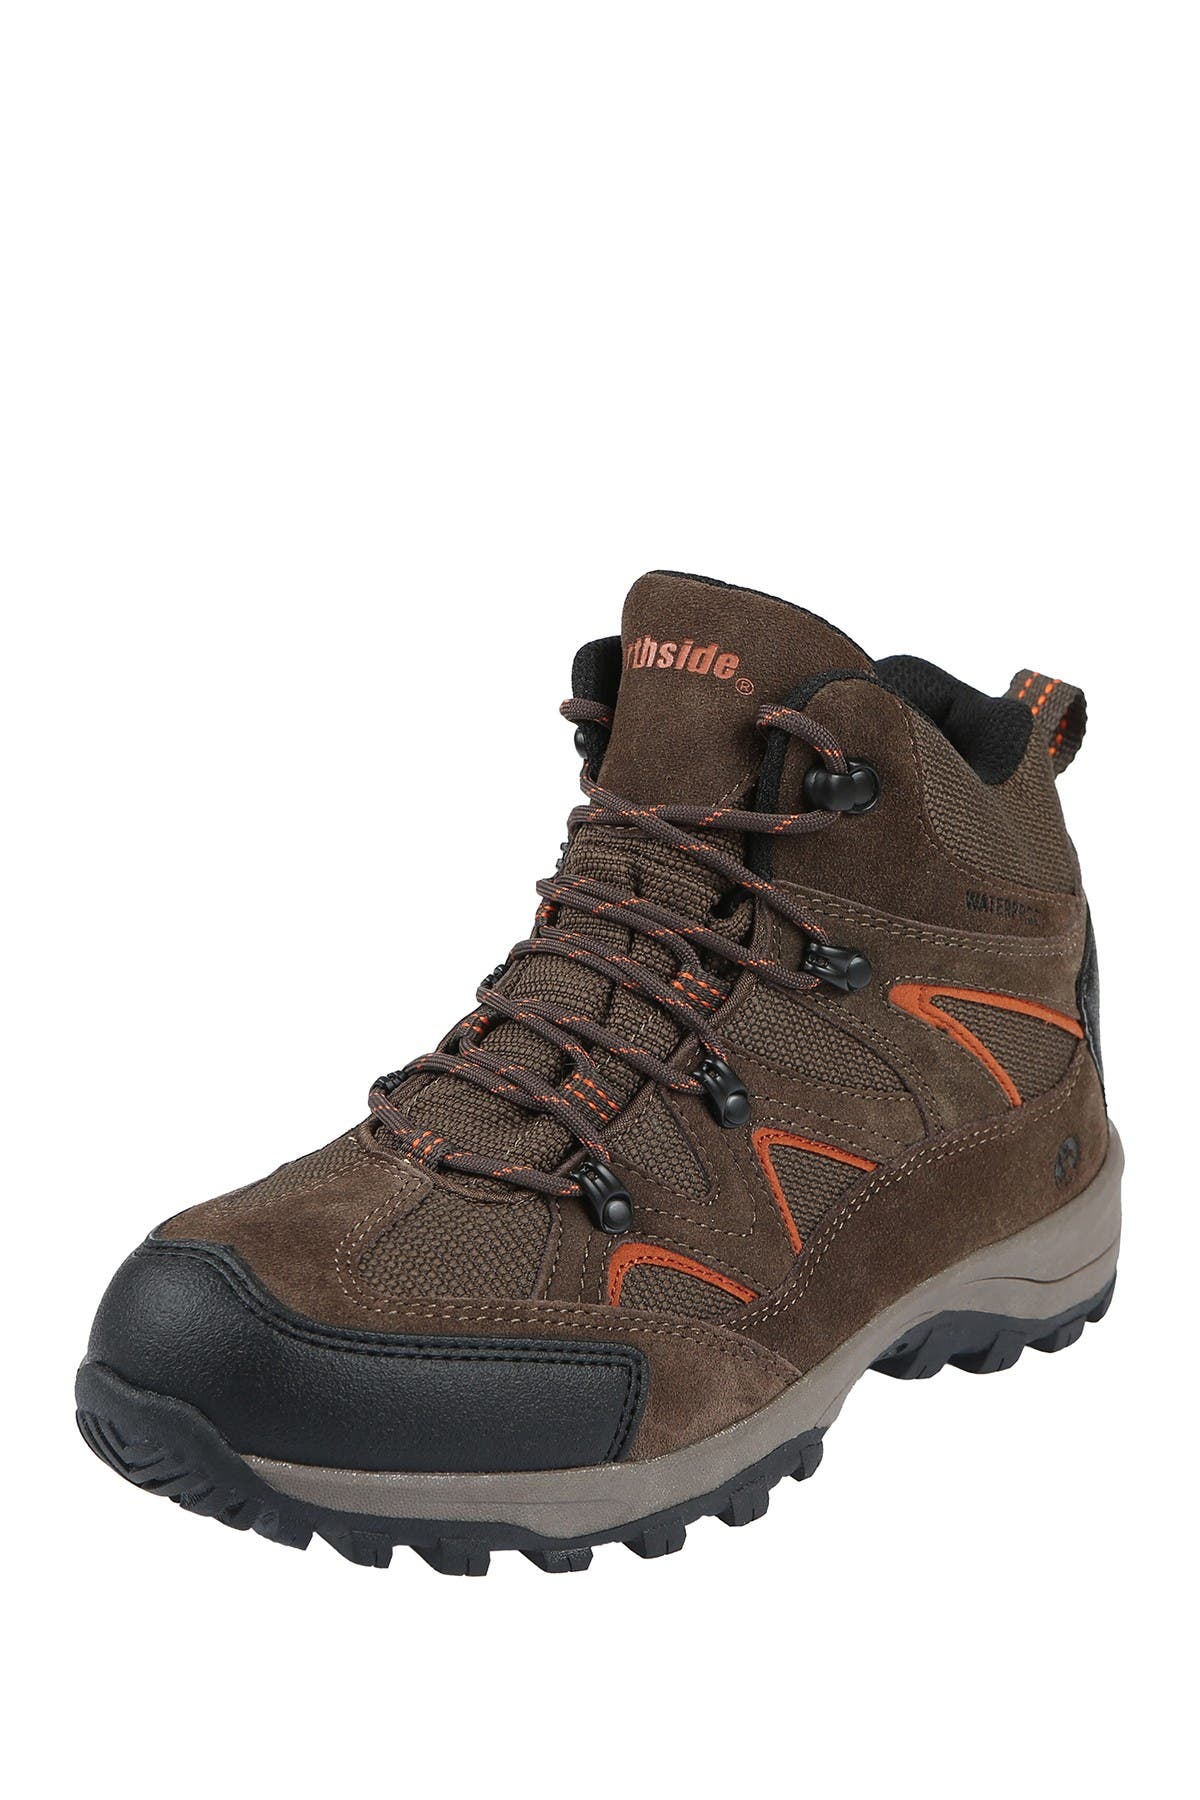 extra wide waterproof hiking boots